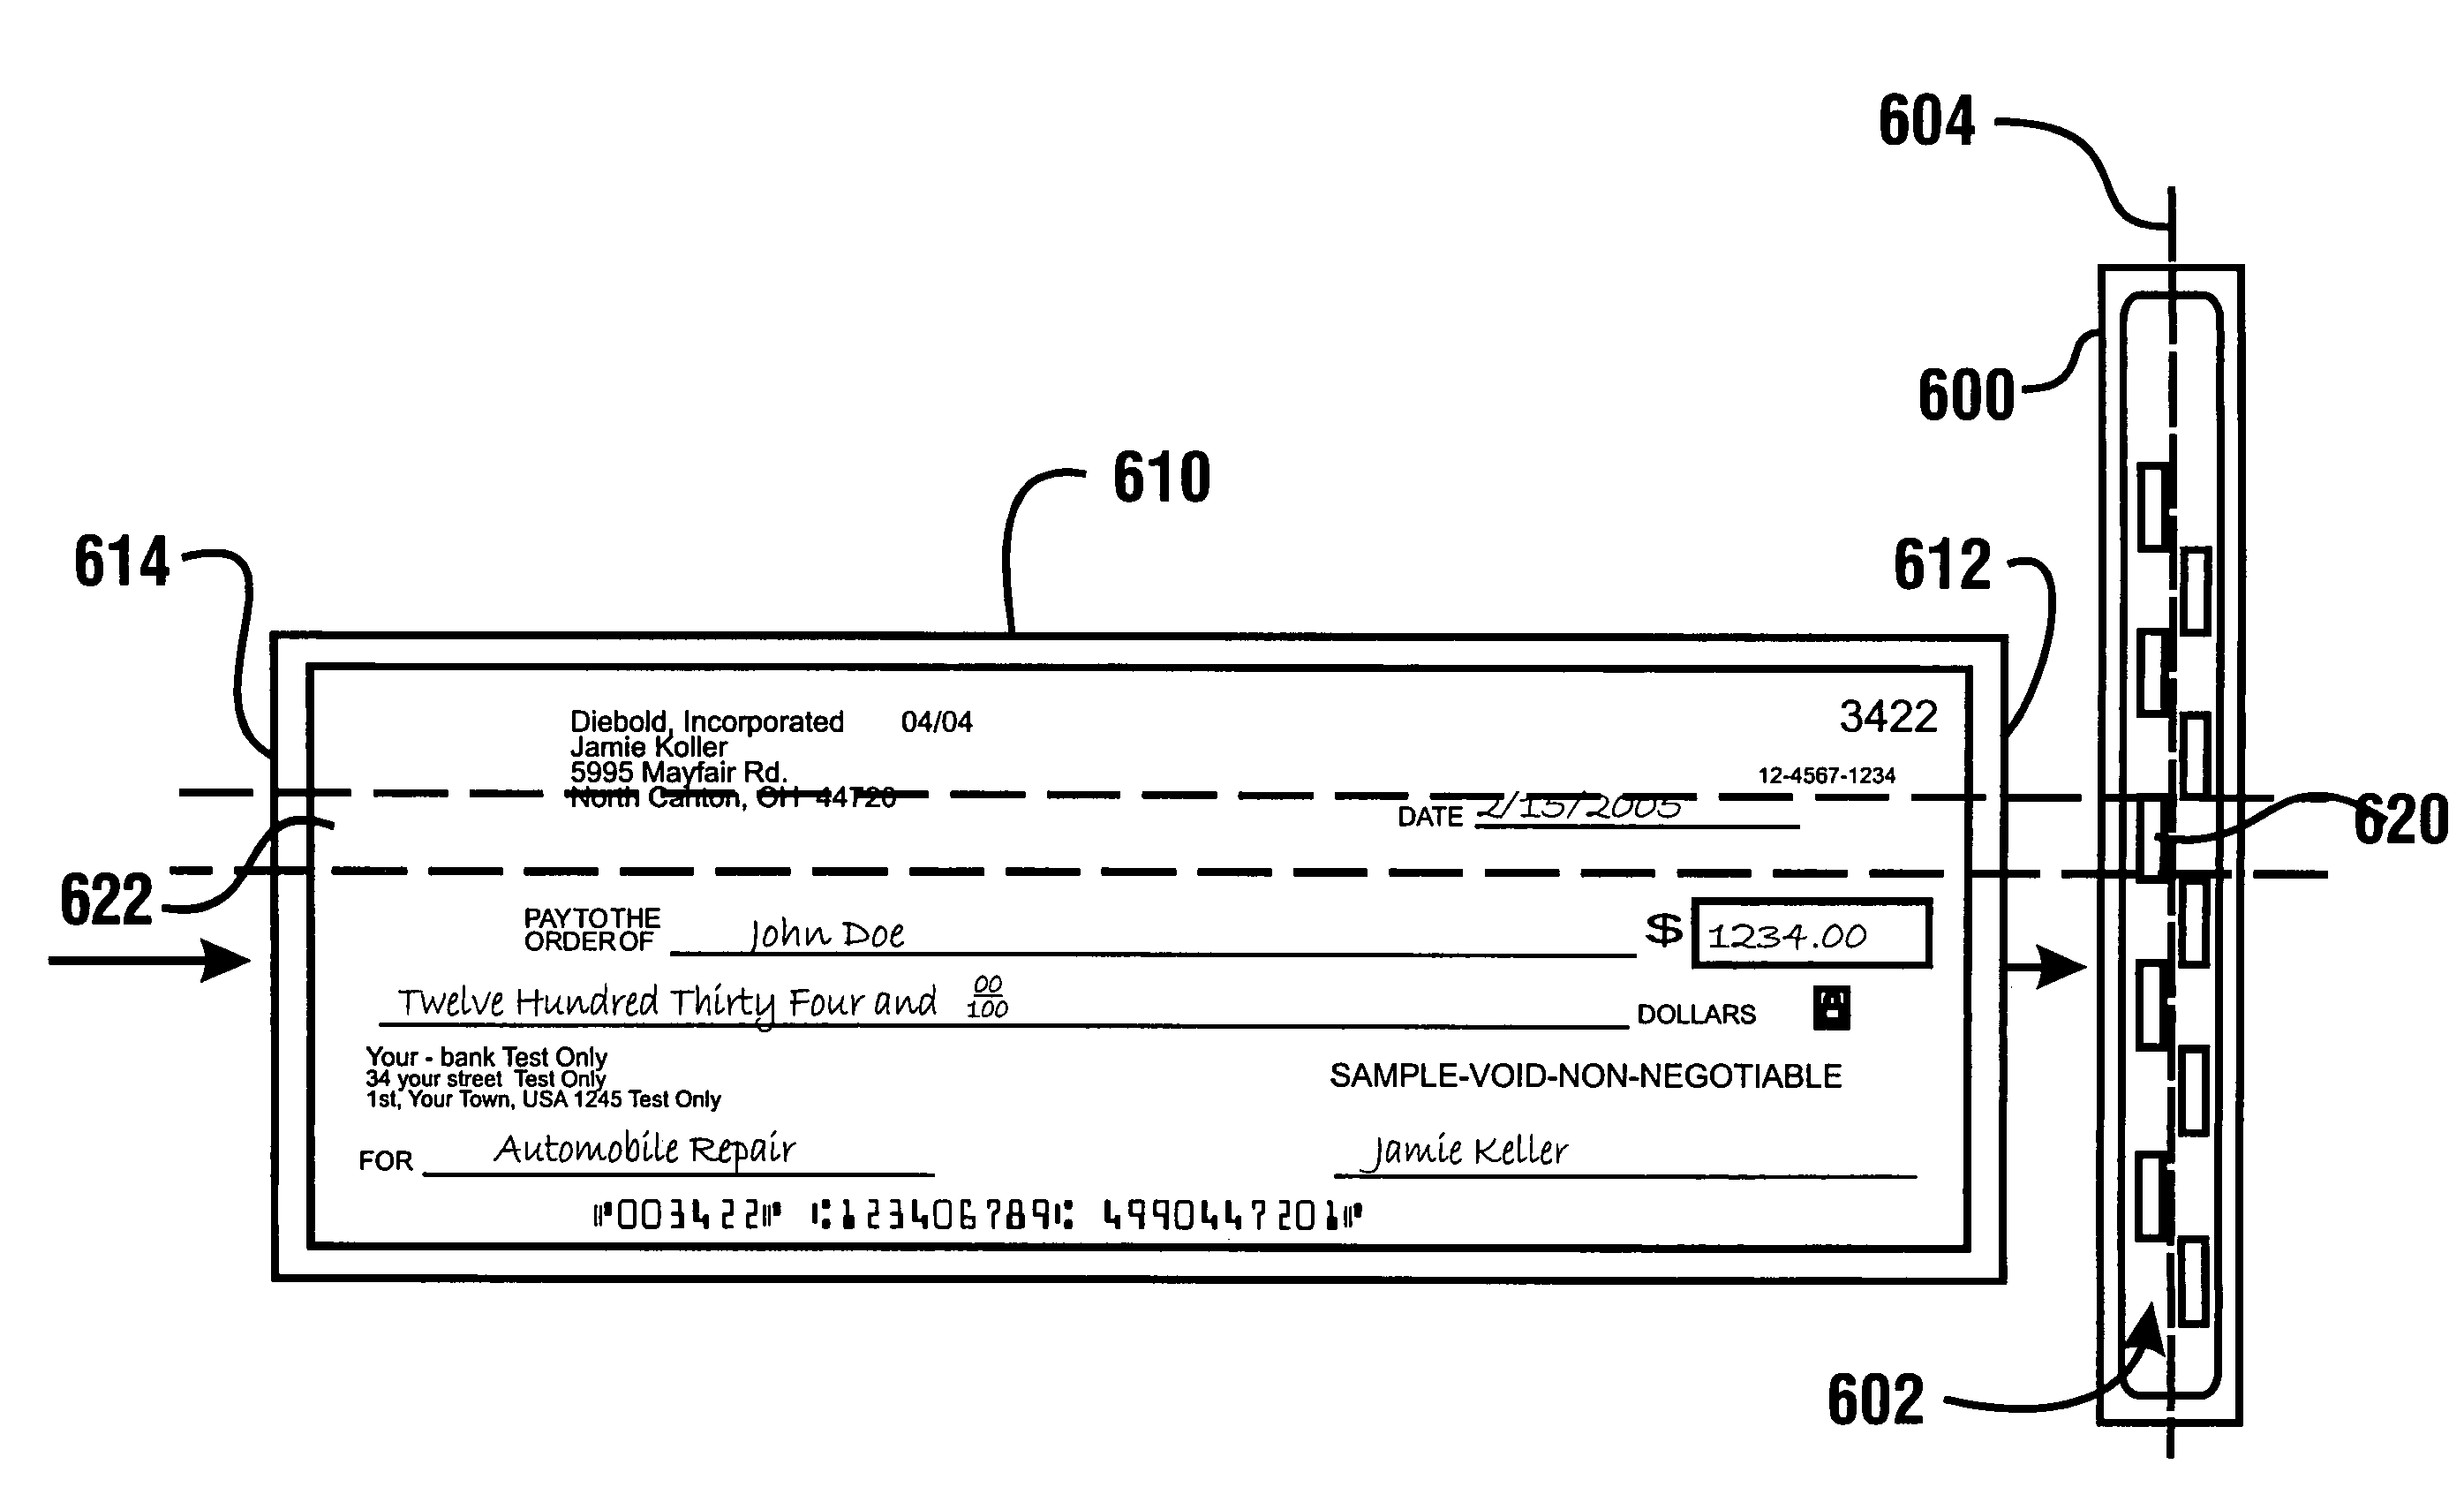 Method of evaluating checks deposited into a cash dispensing automated banking machine